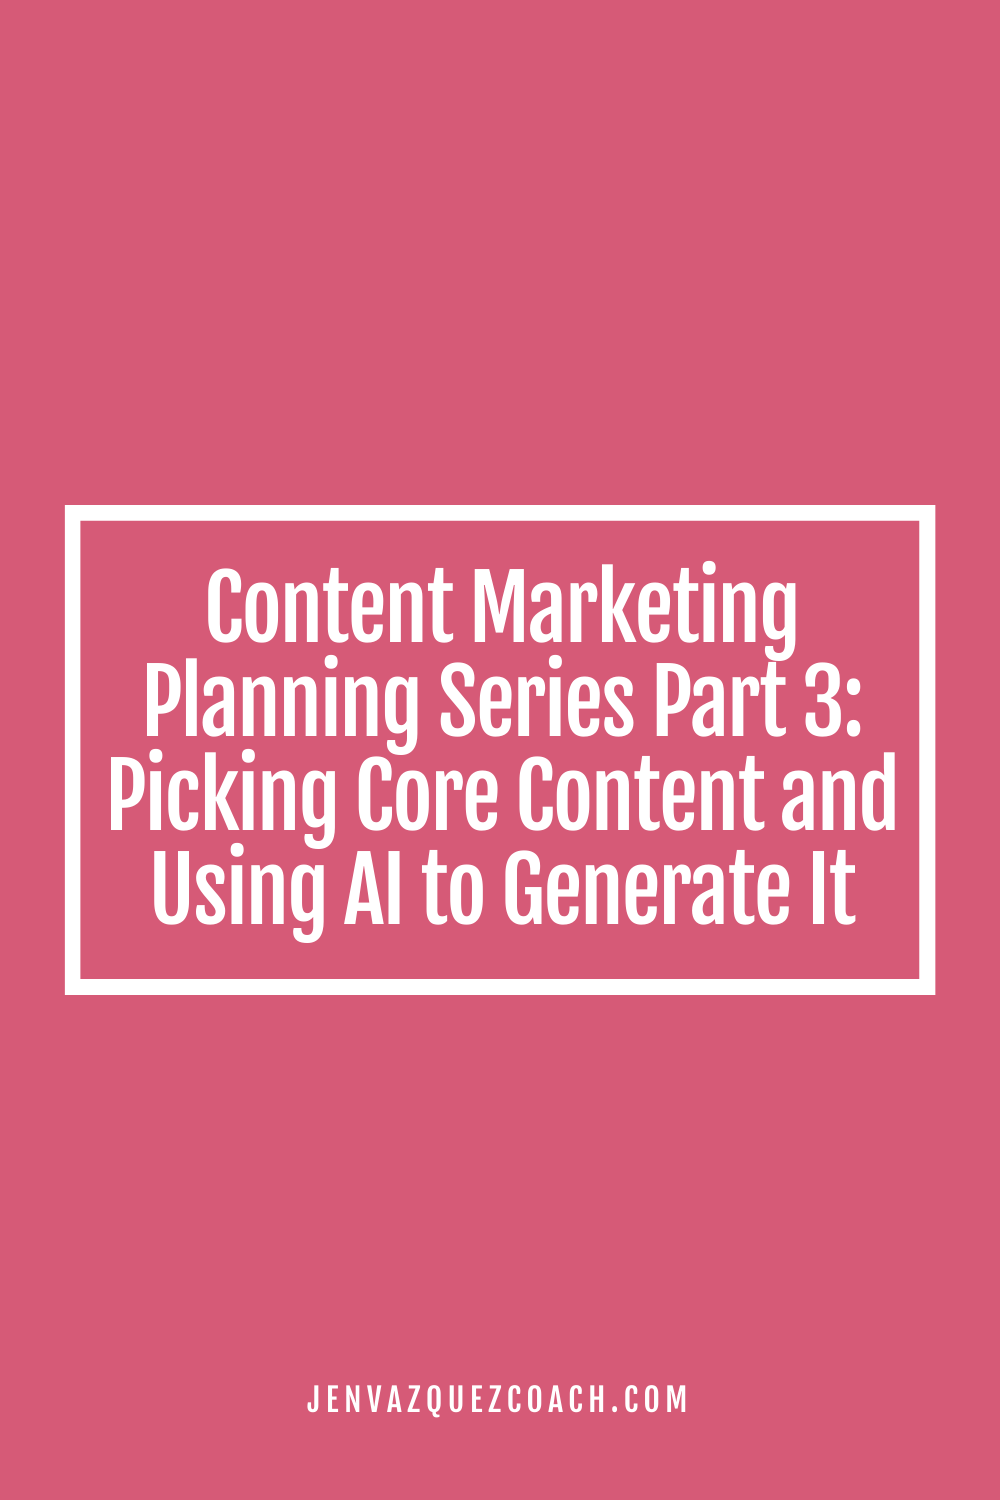 Content Marketing Planning Series Part 3:<br />
Picking Core Content and Using AI to Generate It 